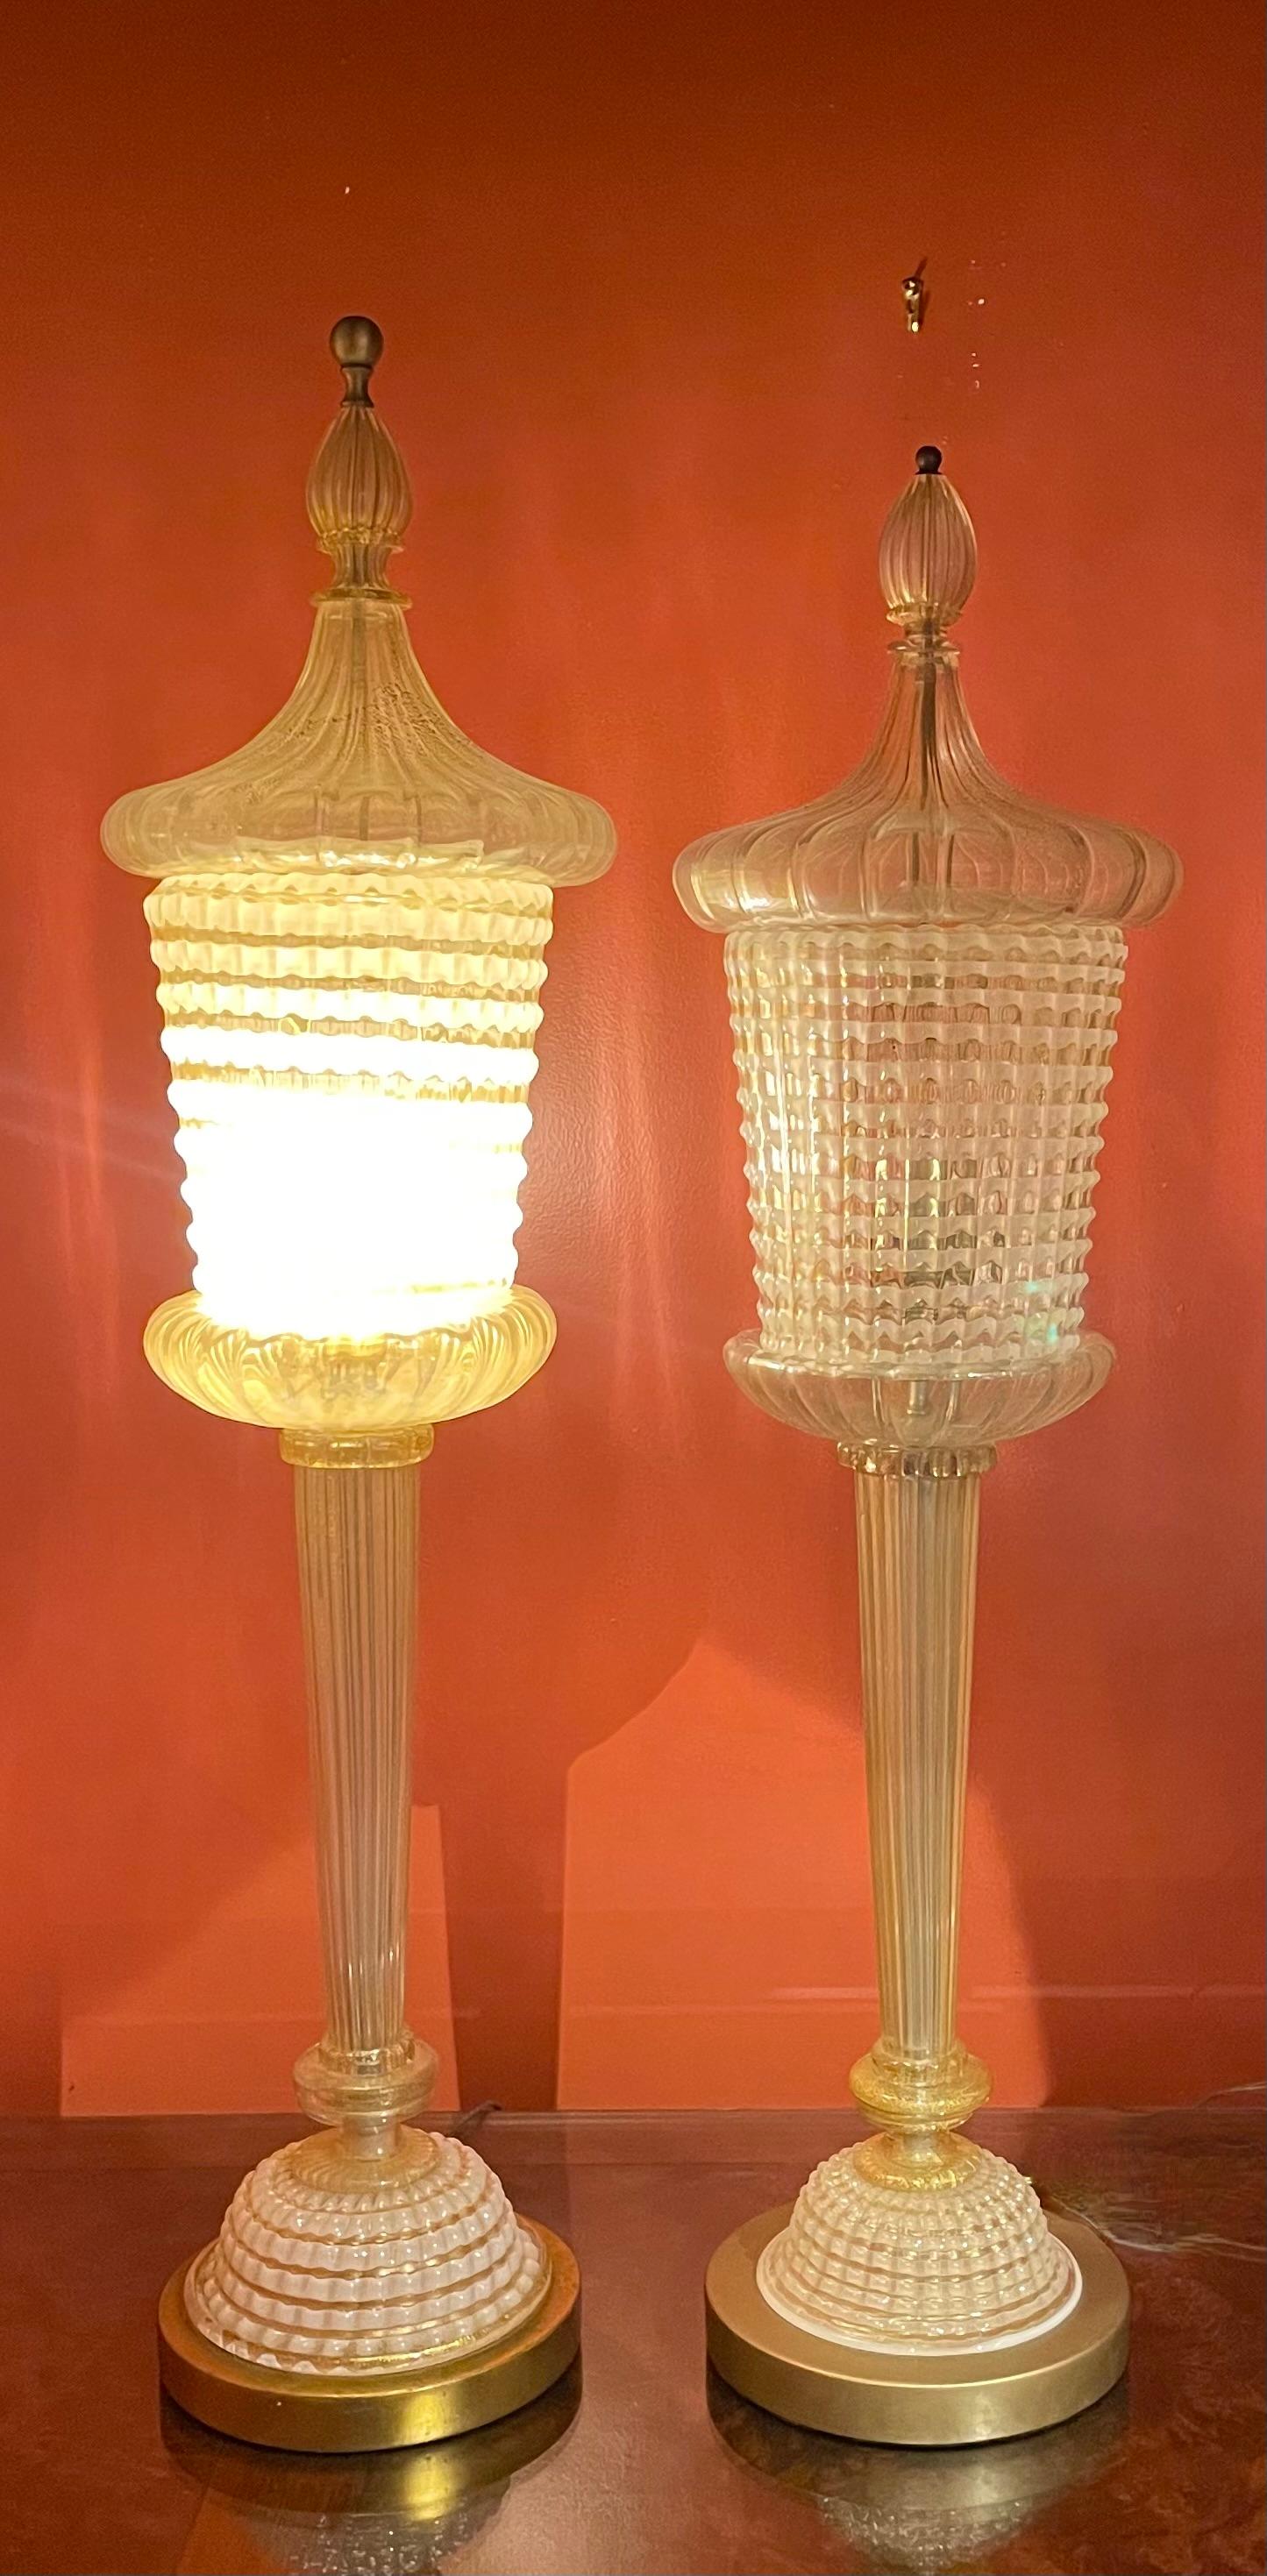 This hugely scaled pair of Barovier and Toso attributed hand blown torchere lamps are extremely hard to find. They differ ever so slightly in scale but to my eye that makes them even more attractive. 

Karl Lagerfeld owned a nearly identical one